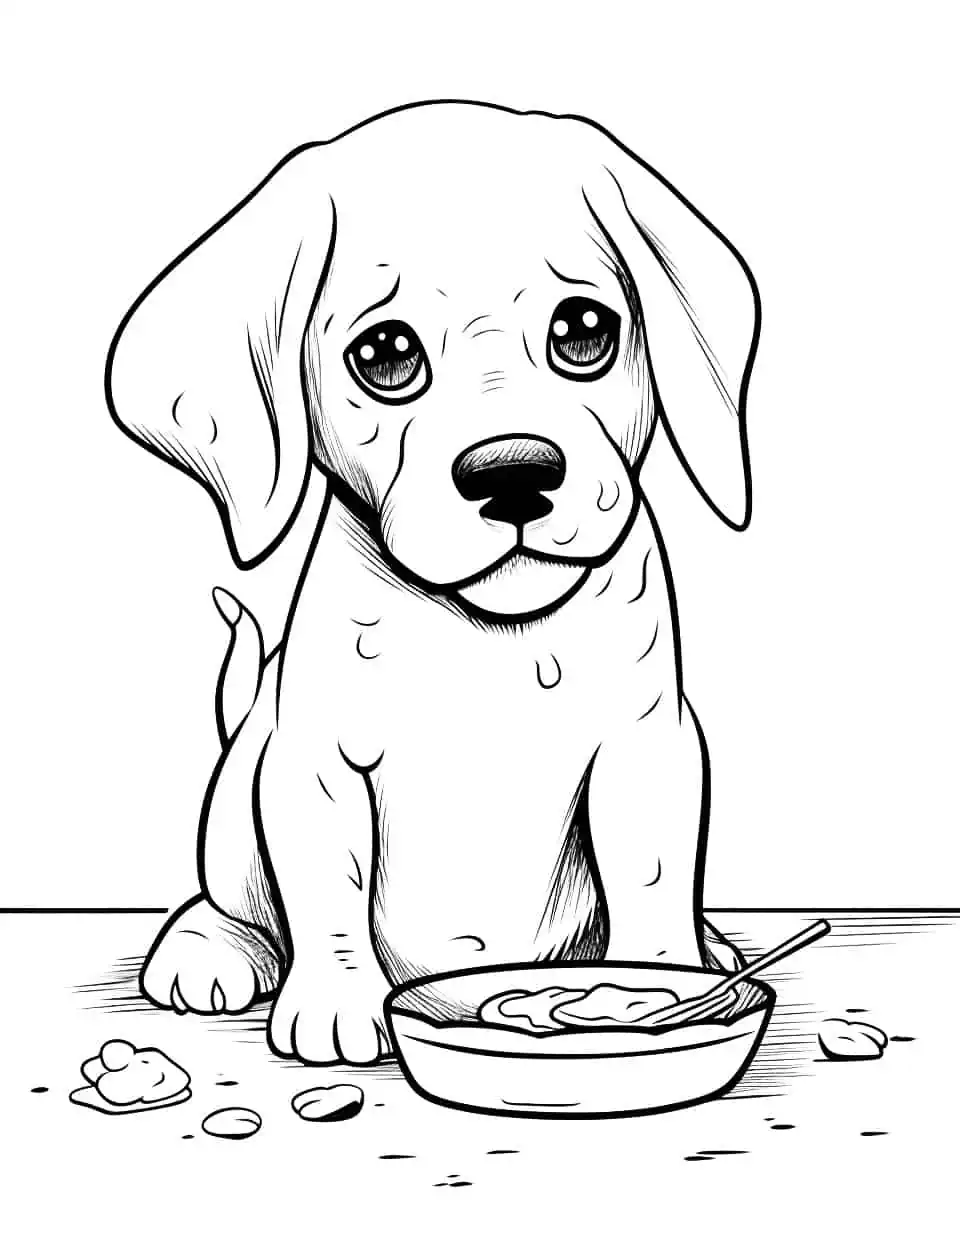 Beagle's Breakfast Dog Coloring Page - A Beagle puppy making a mess while trying to eat his breakfast.